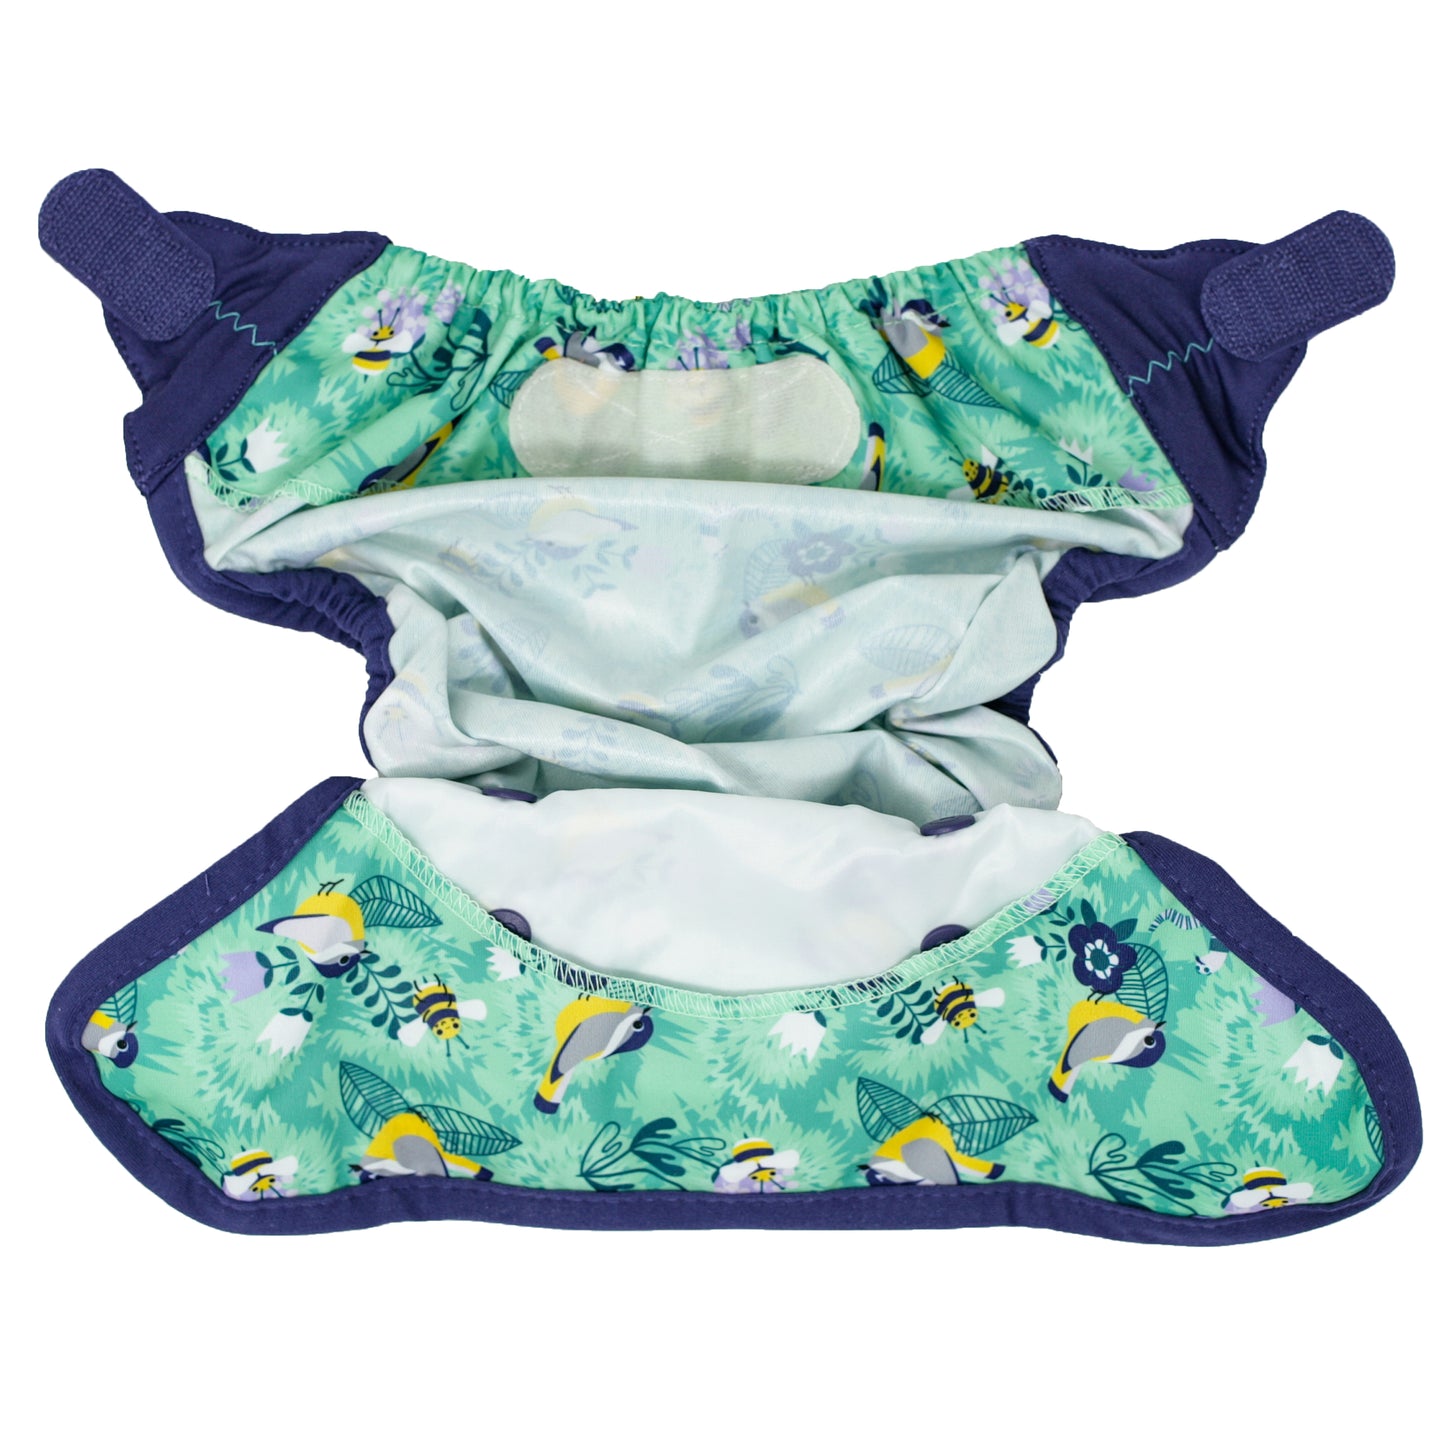 Inside Of Green Blue Pop-in One Size Around The Garden Reusable Cloth Nappy Wrap, With Velcro Fastening